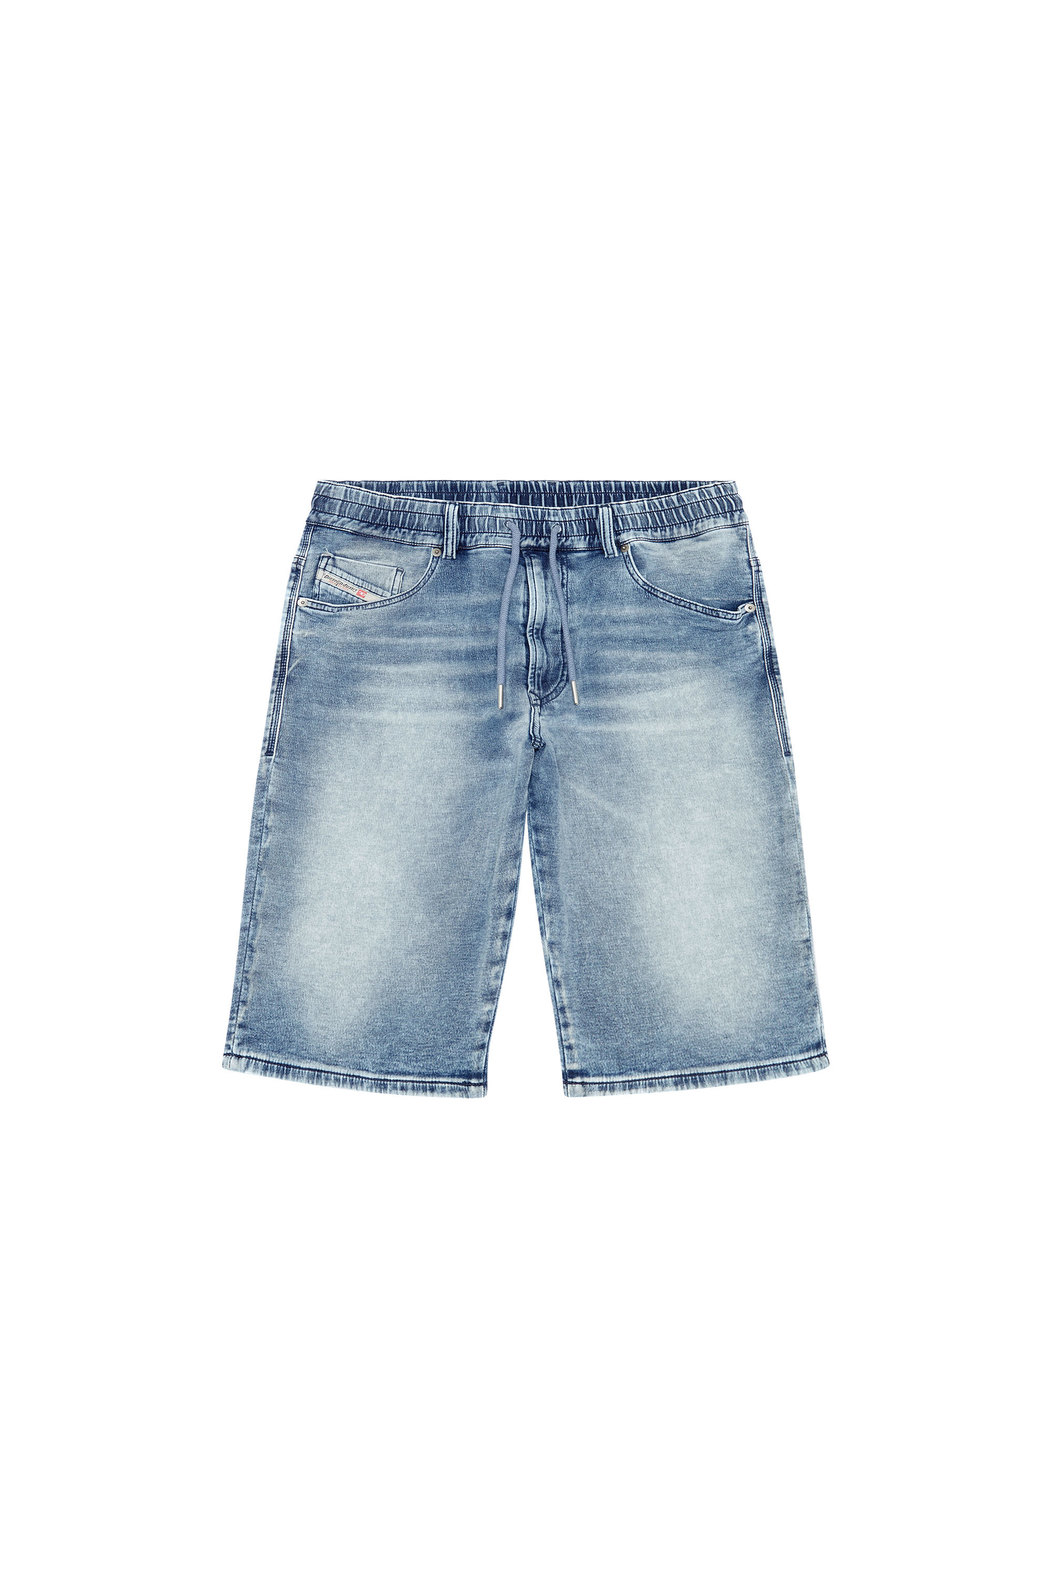 Shorts in Track Denim with used details